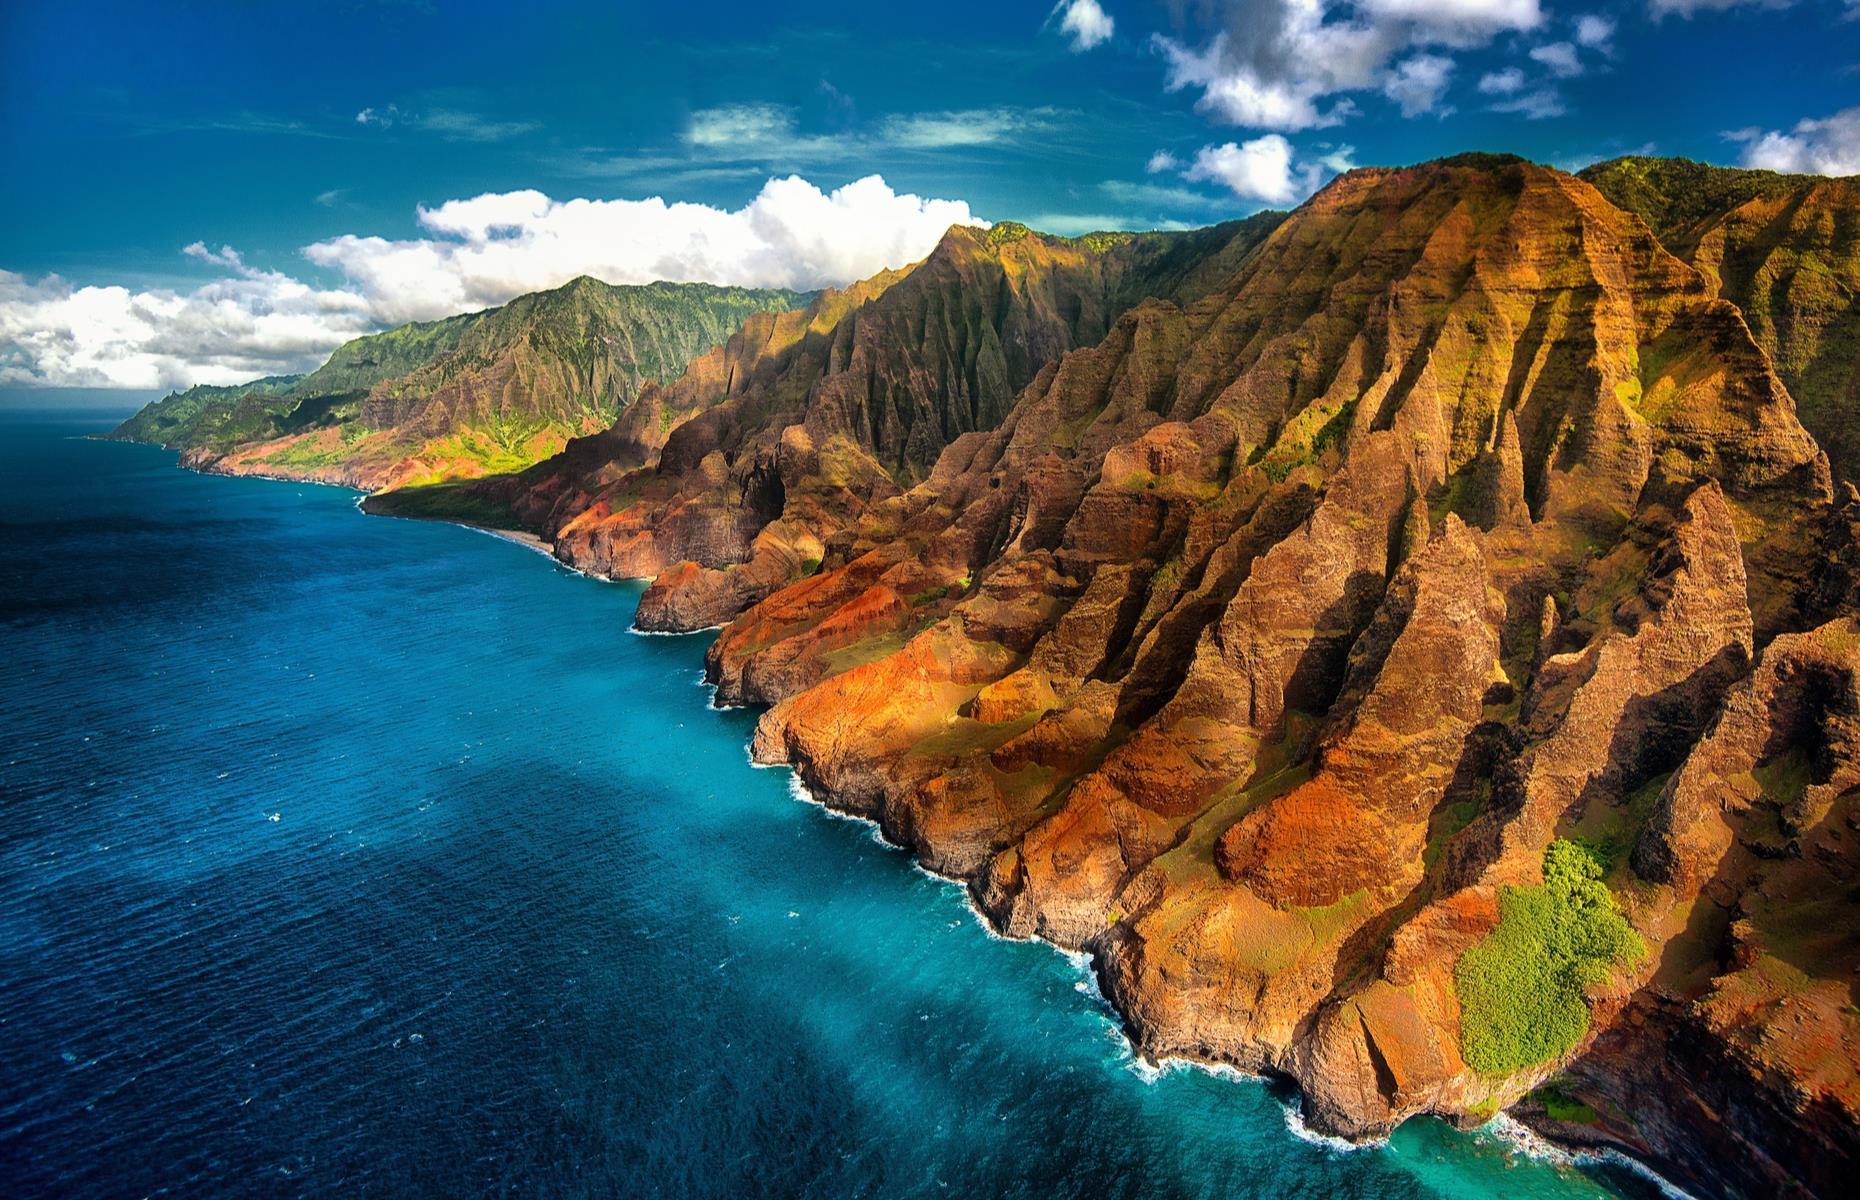 <p>We're not sure about you but we've never seen anything more incredible than the Nā Pali Coast in Hawaii. This dazzling shoreline is punctuated by razor-sharp sea cliffs, delicate winding valleys and cascading waterfalls. If the eye-catching area reminds you of another age when dinosaurs ruled the world, it's no wonder – the coast was the backdrop for sci-fi classic <em>The Lost World: Jurassic Park</em>.</p>  <p><a href="https://www.loveexploring.com/galleries/108269/incredible-landscapes-you-wont-believe-exist"><strong>You won't believe these landscapes actually exist</strong></a></p>